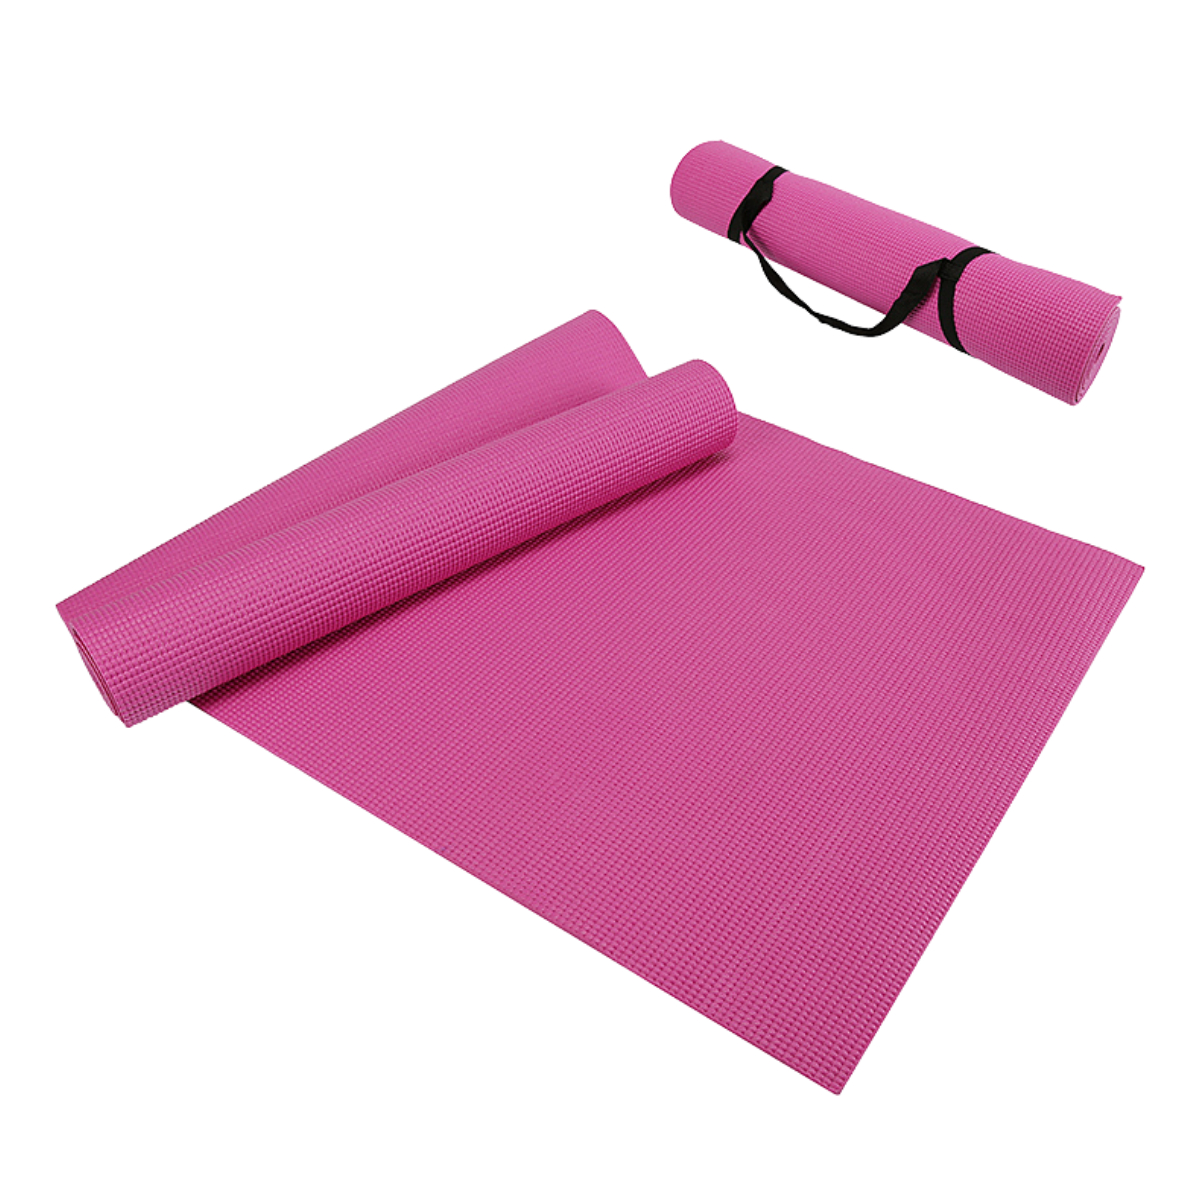 Performance Yoga Mat With Carrying Straps - Pink